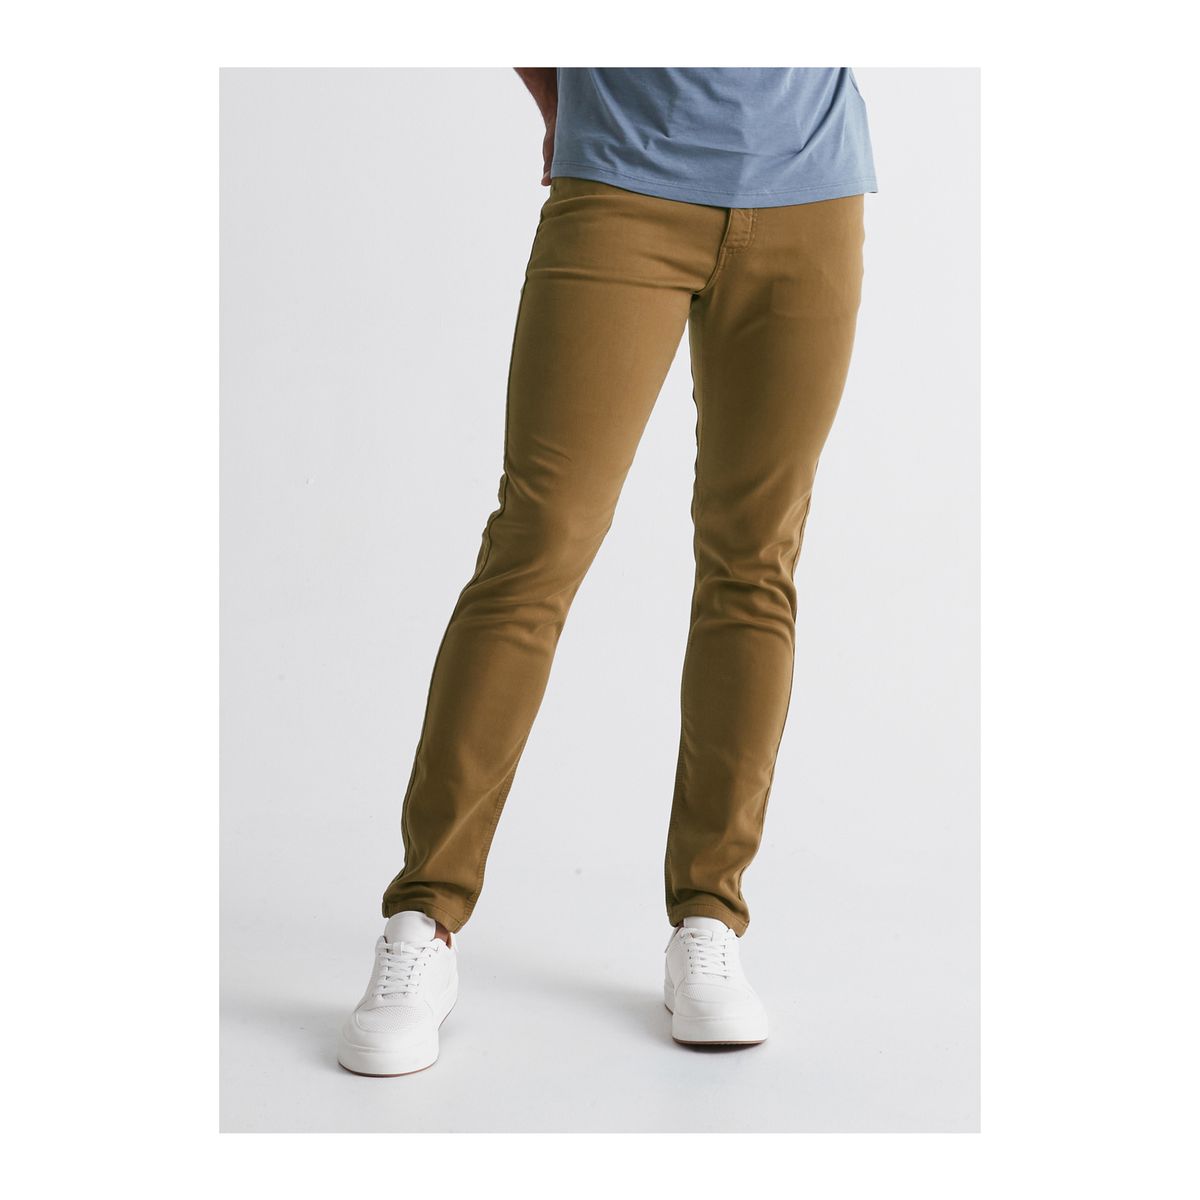 No Sweat Relaxed Pant Taper